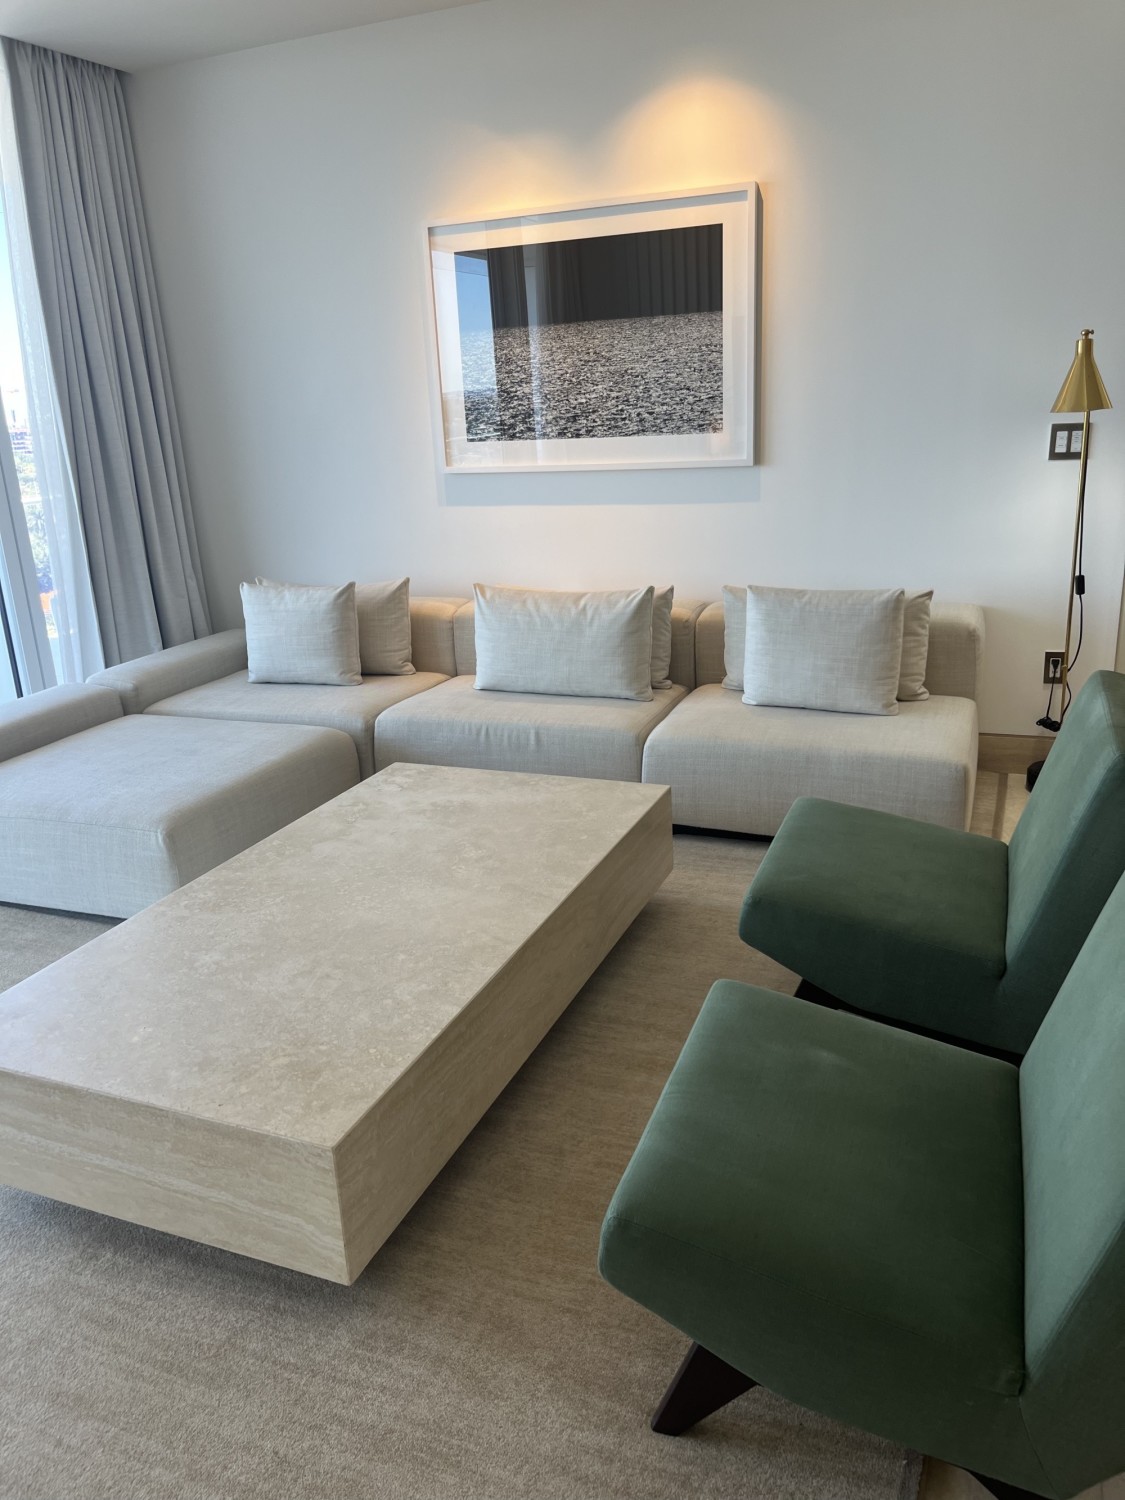 A lounge area in a hotel suite with a white couch, two green lounge chairs, artwork hanging on the white wall, a floor lamp in the right hand corner and a rectangular coffee table in the middle of the room. 